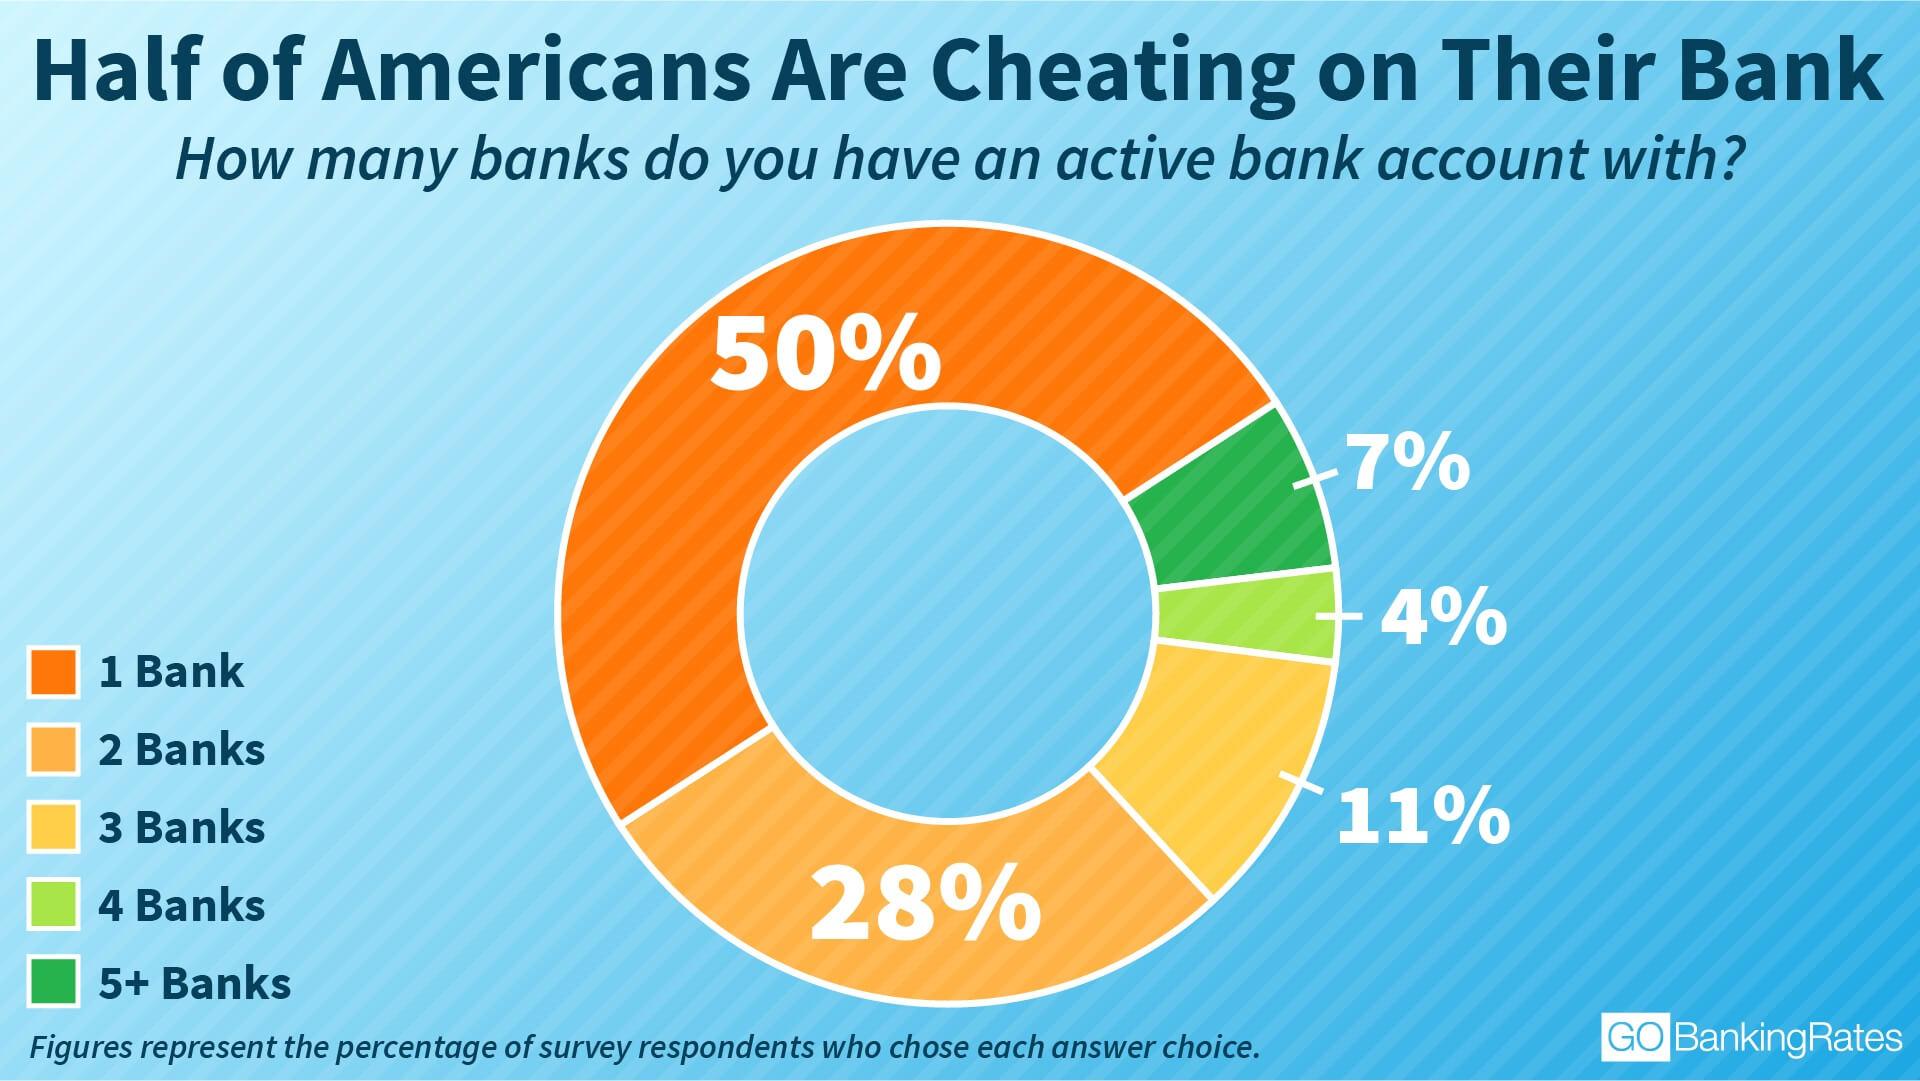 Half of Americans Are Cheating on Their Bank